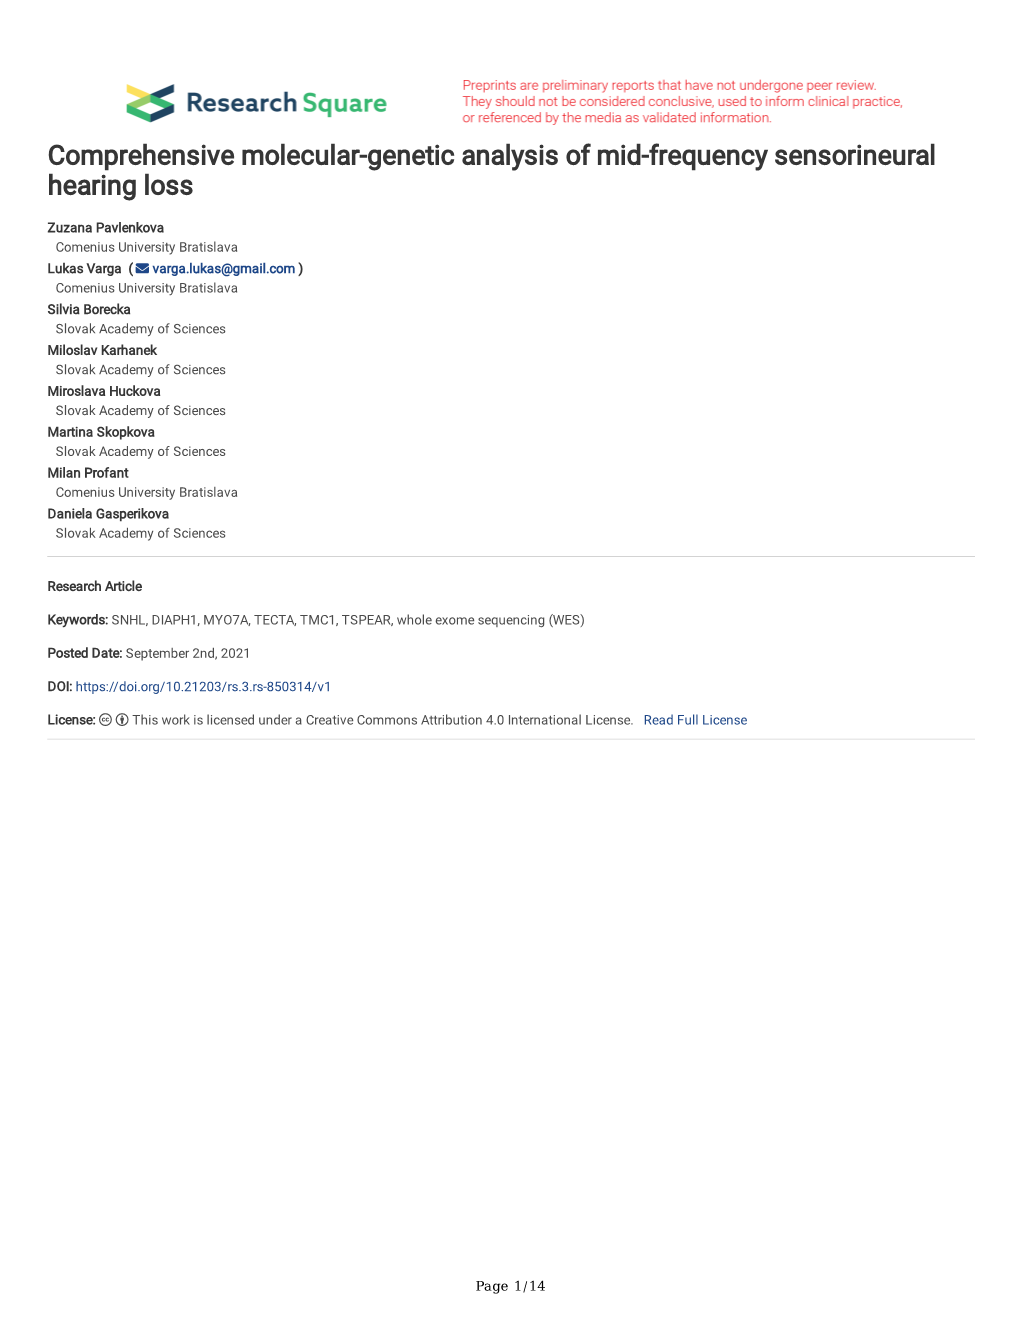 Comprehensive Molecular-Genetic Analysis of Mid-Frequency Sensorineural Hearing Loss